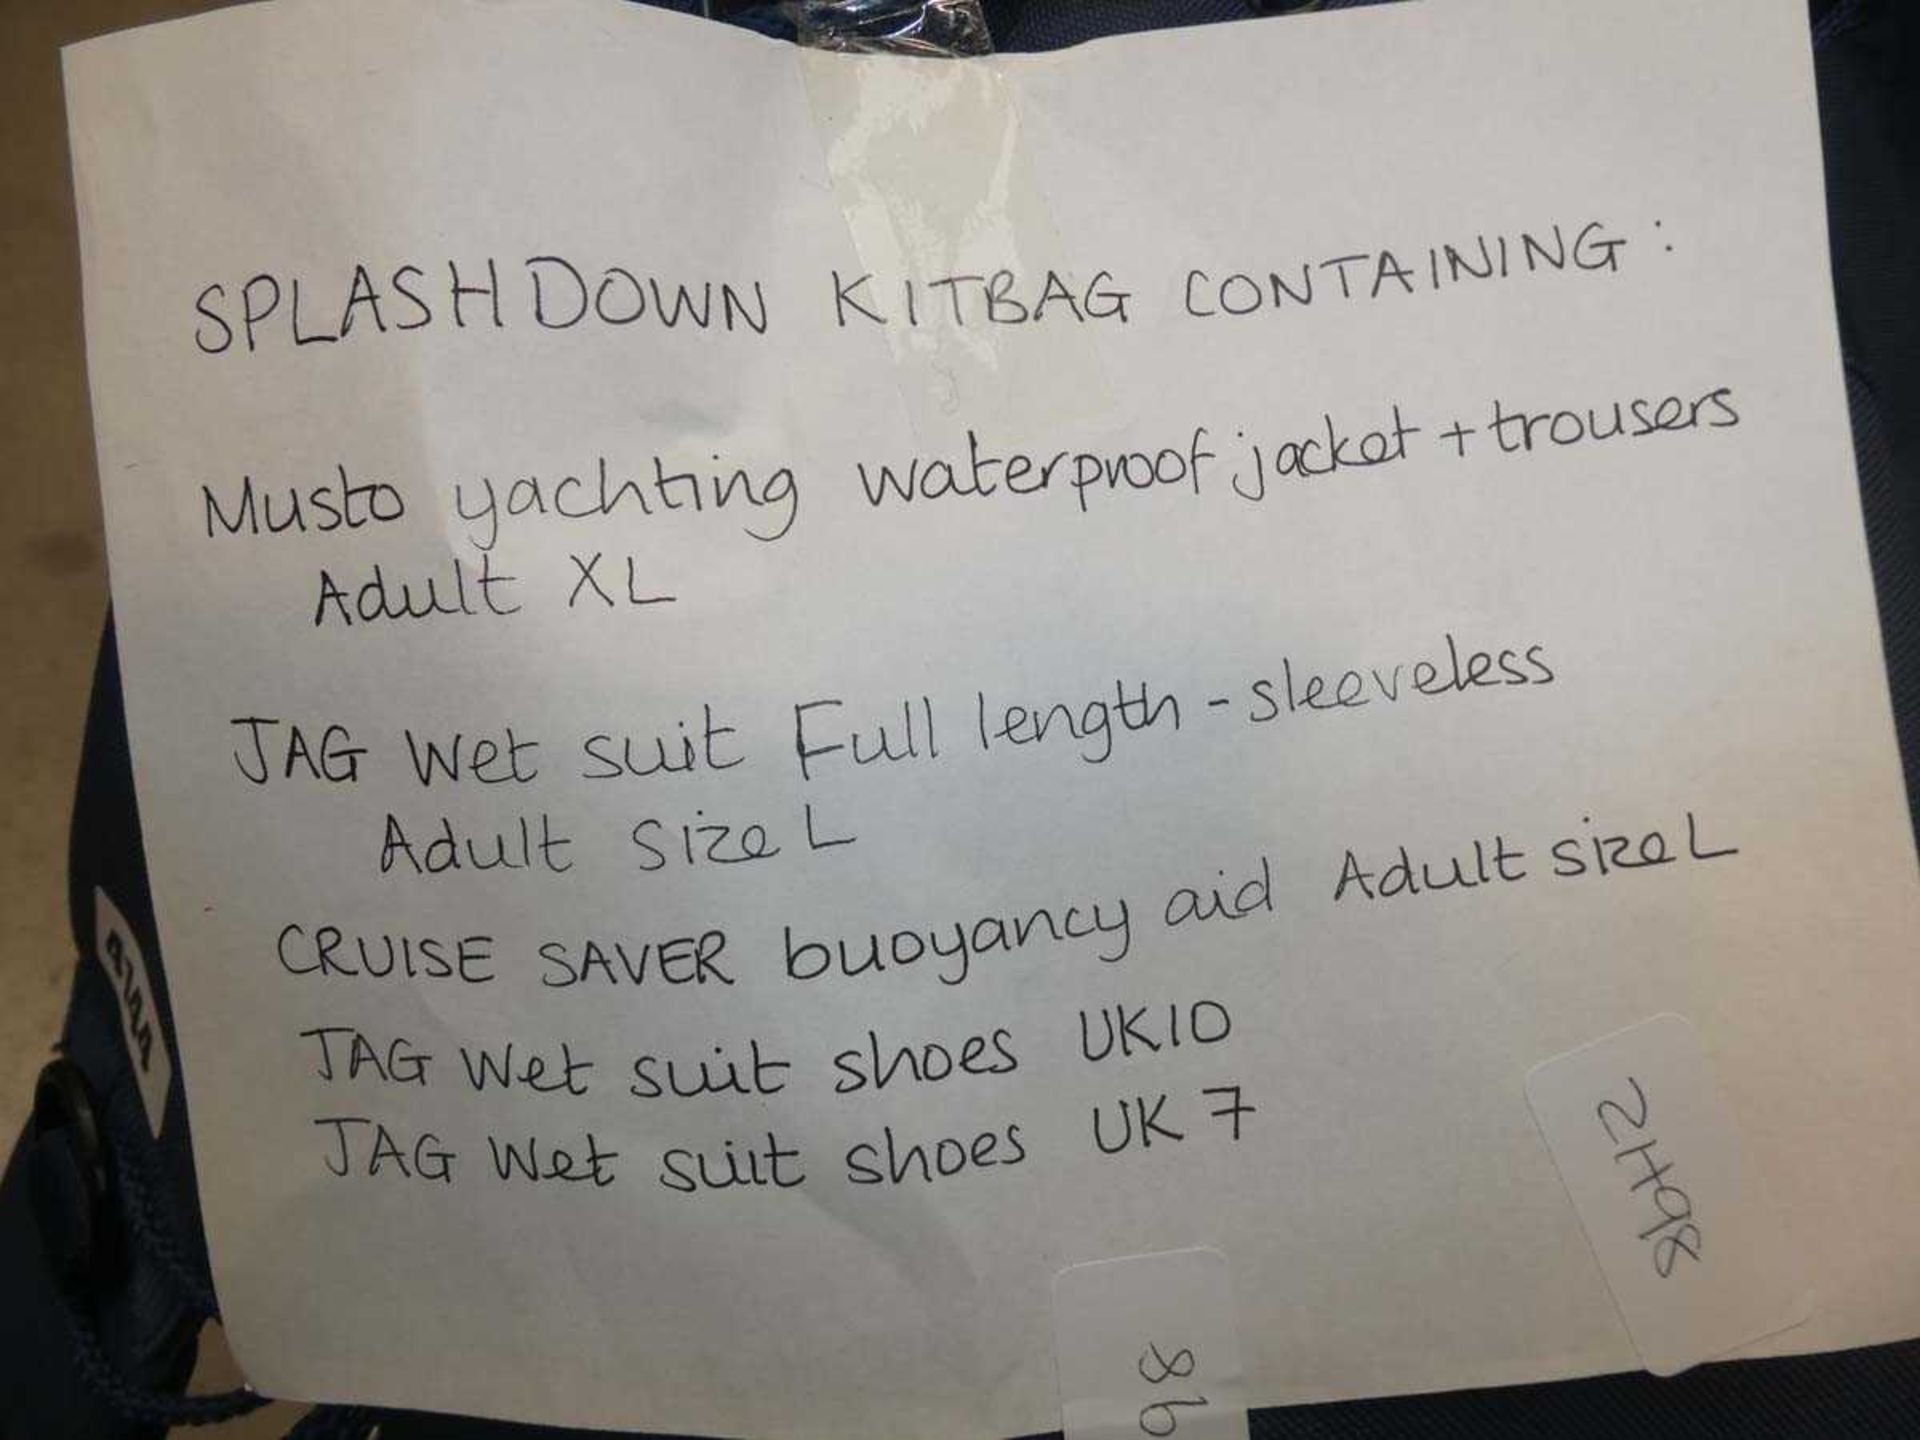 Splashdown kit bag containing waterproof jacket trousers, wetsuit, and wet boots - Image 3 of 3